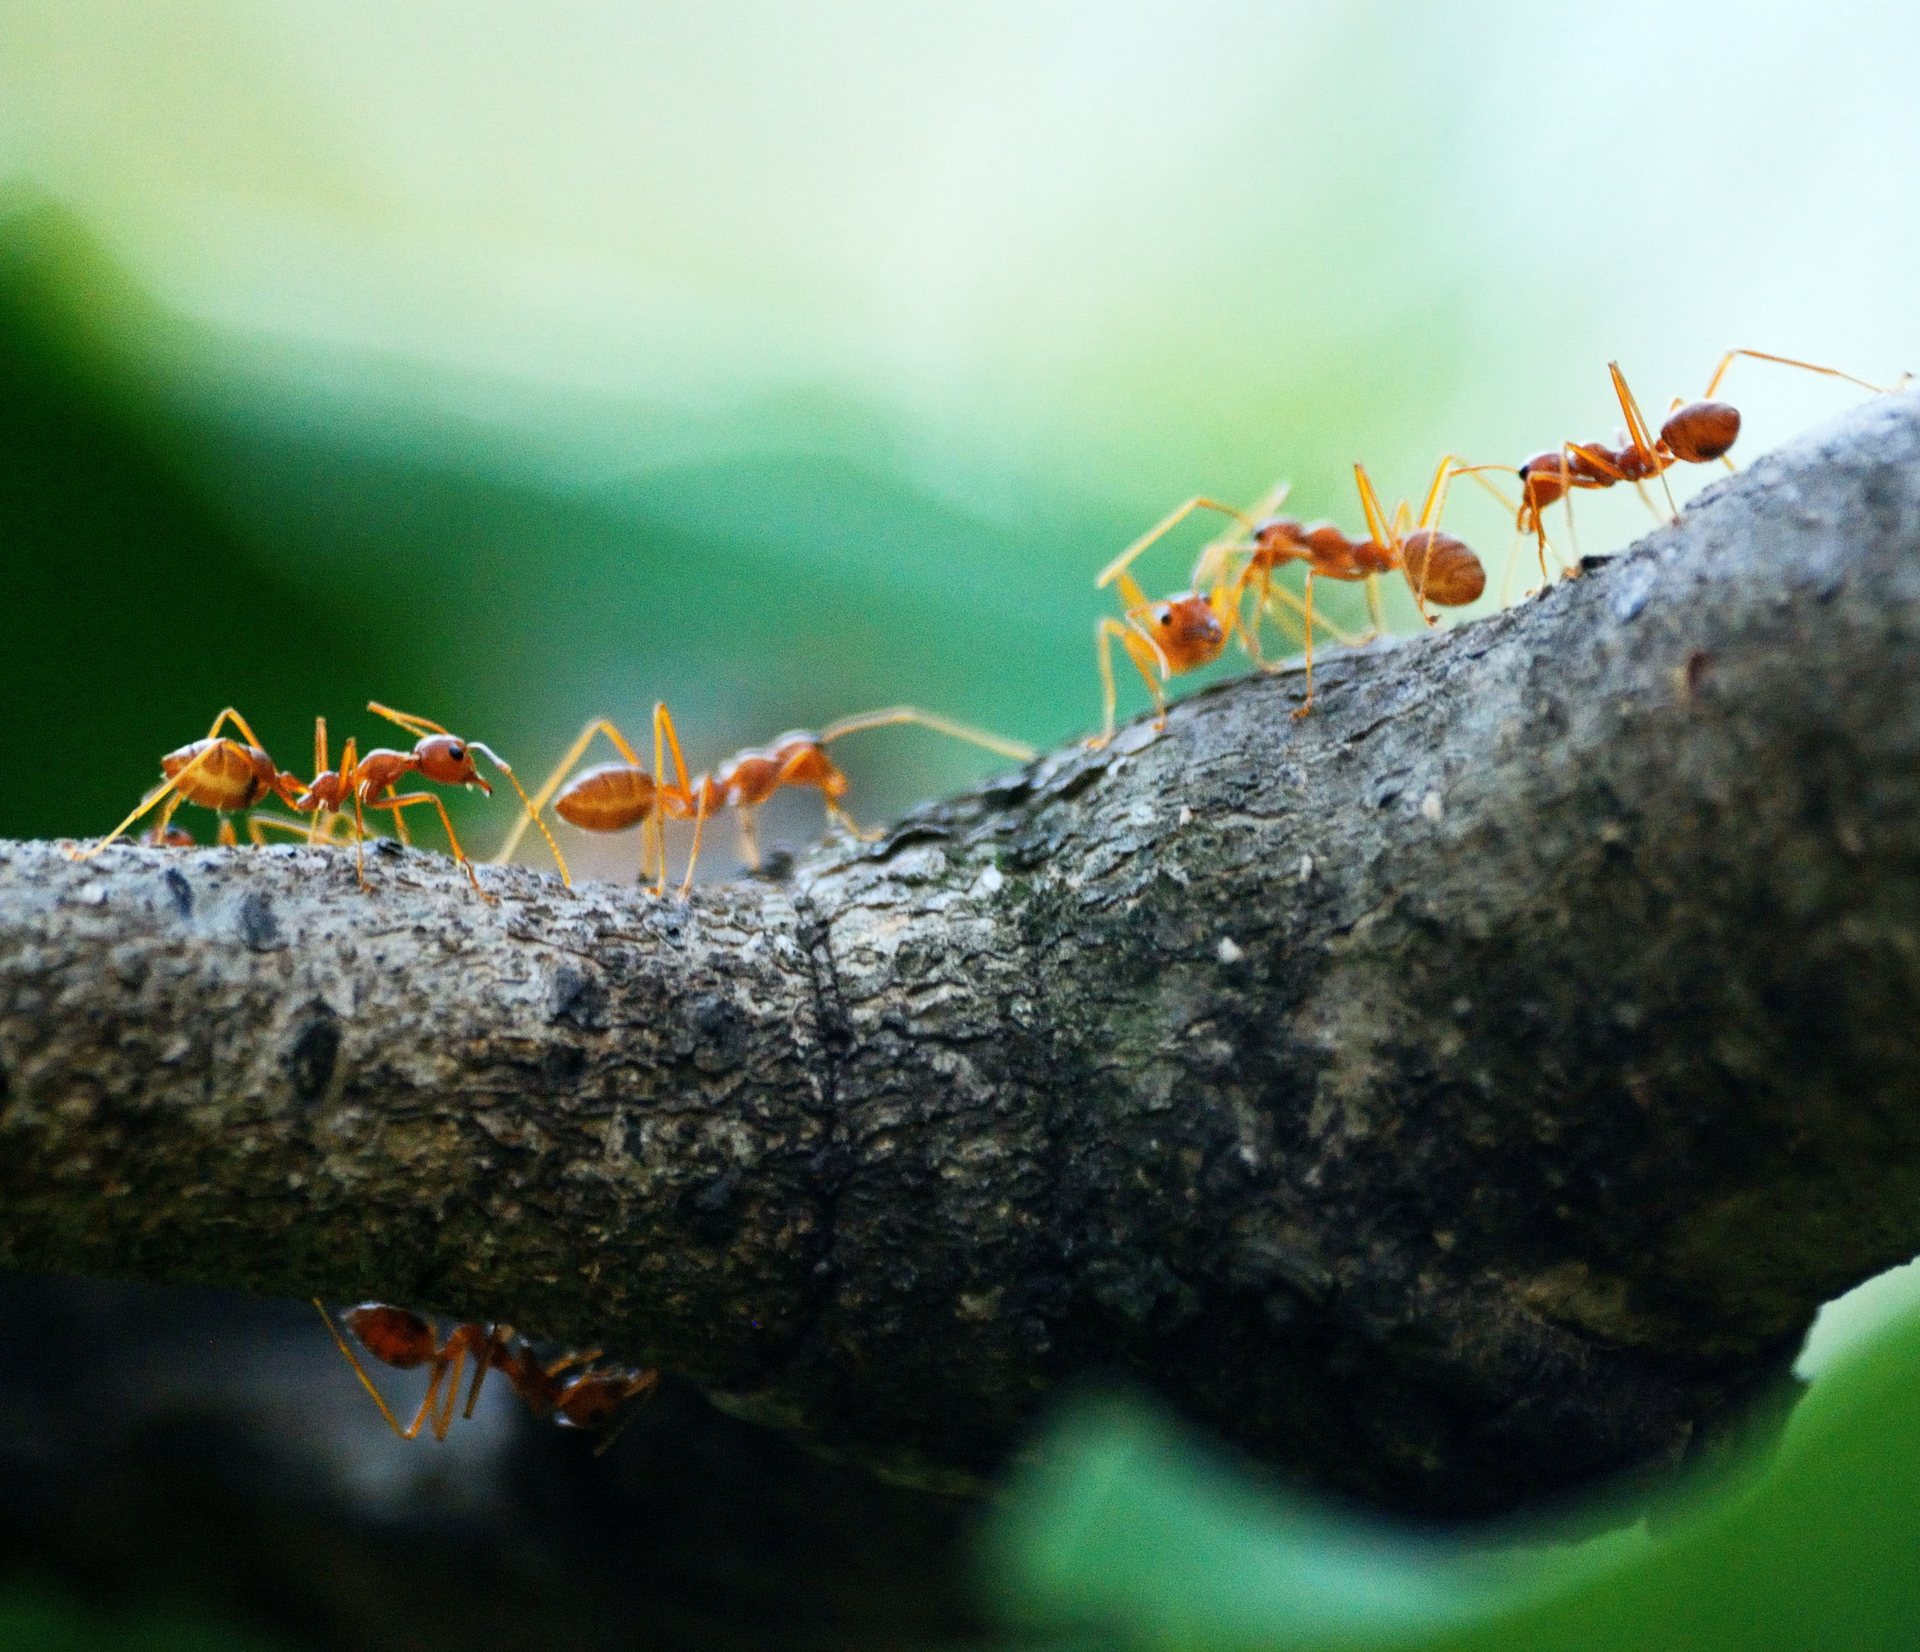 Ants in Thailand. Photo by Poranimm Athitha.